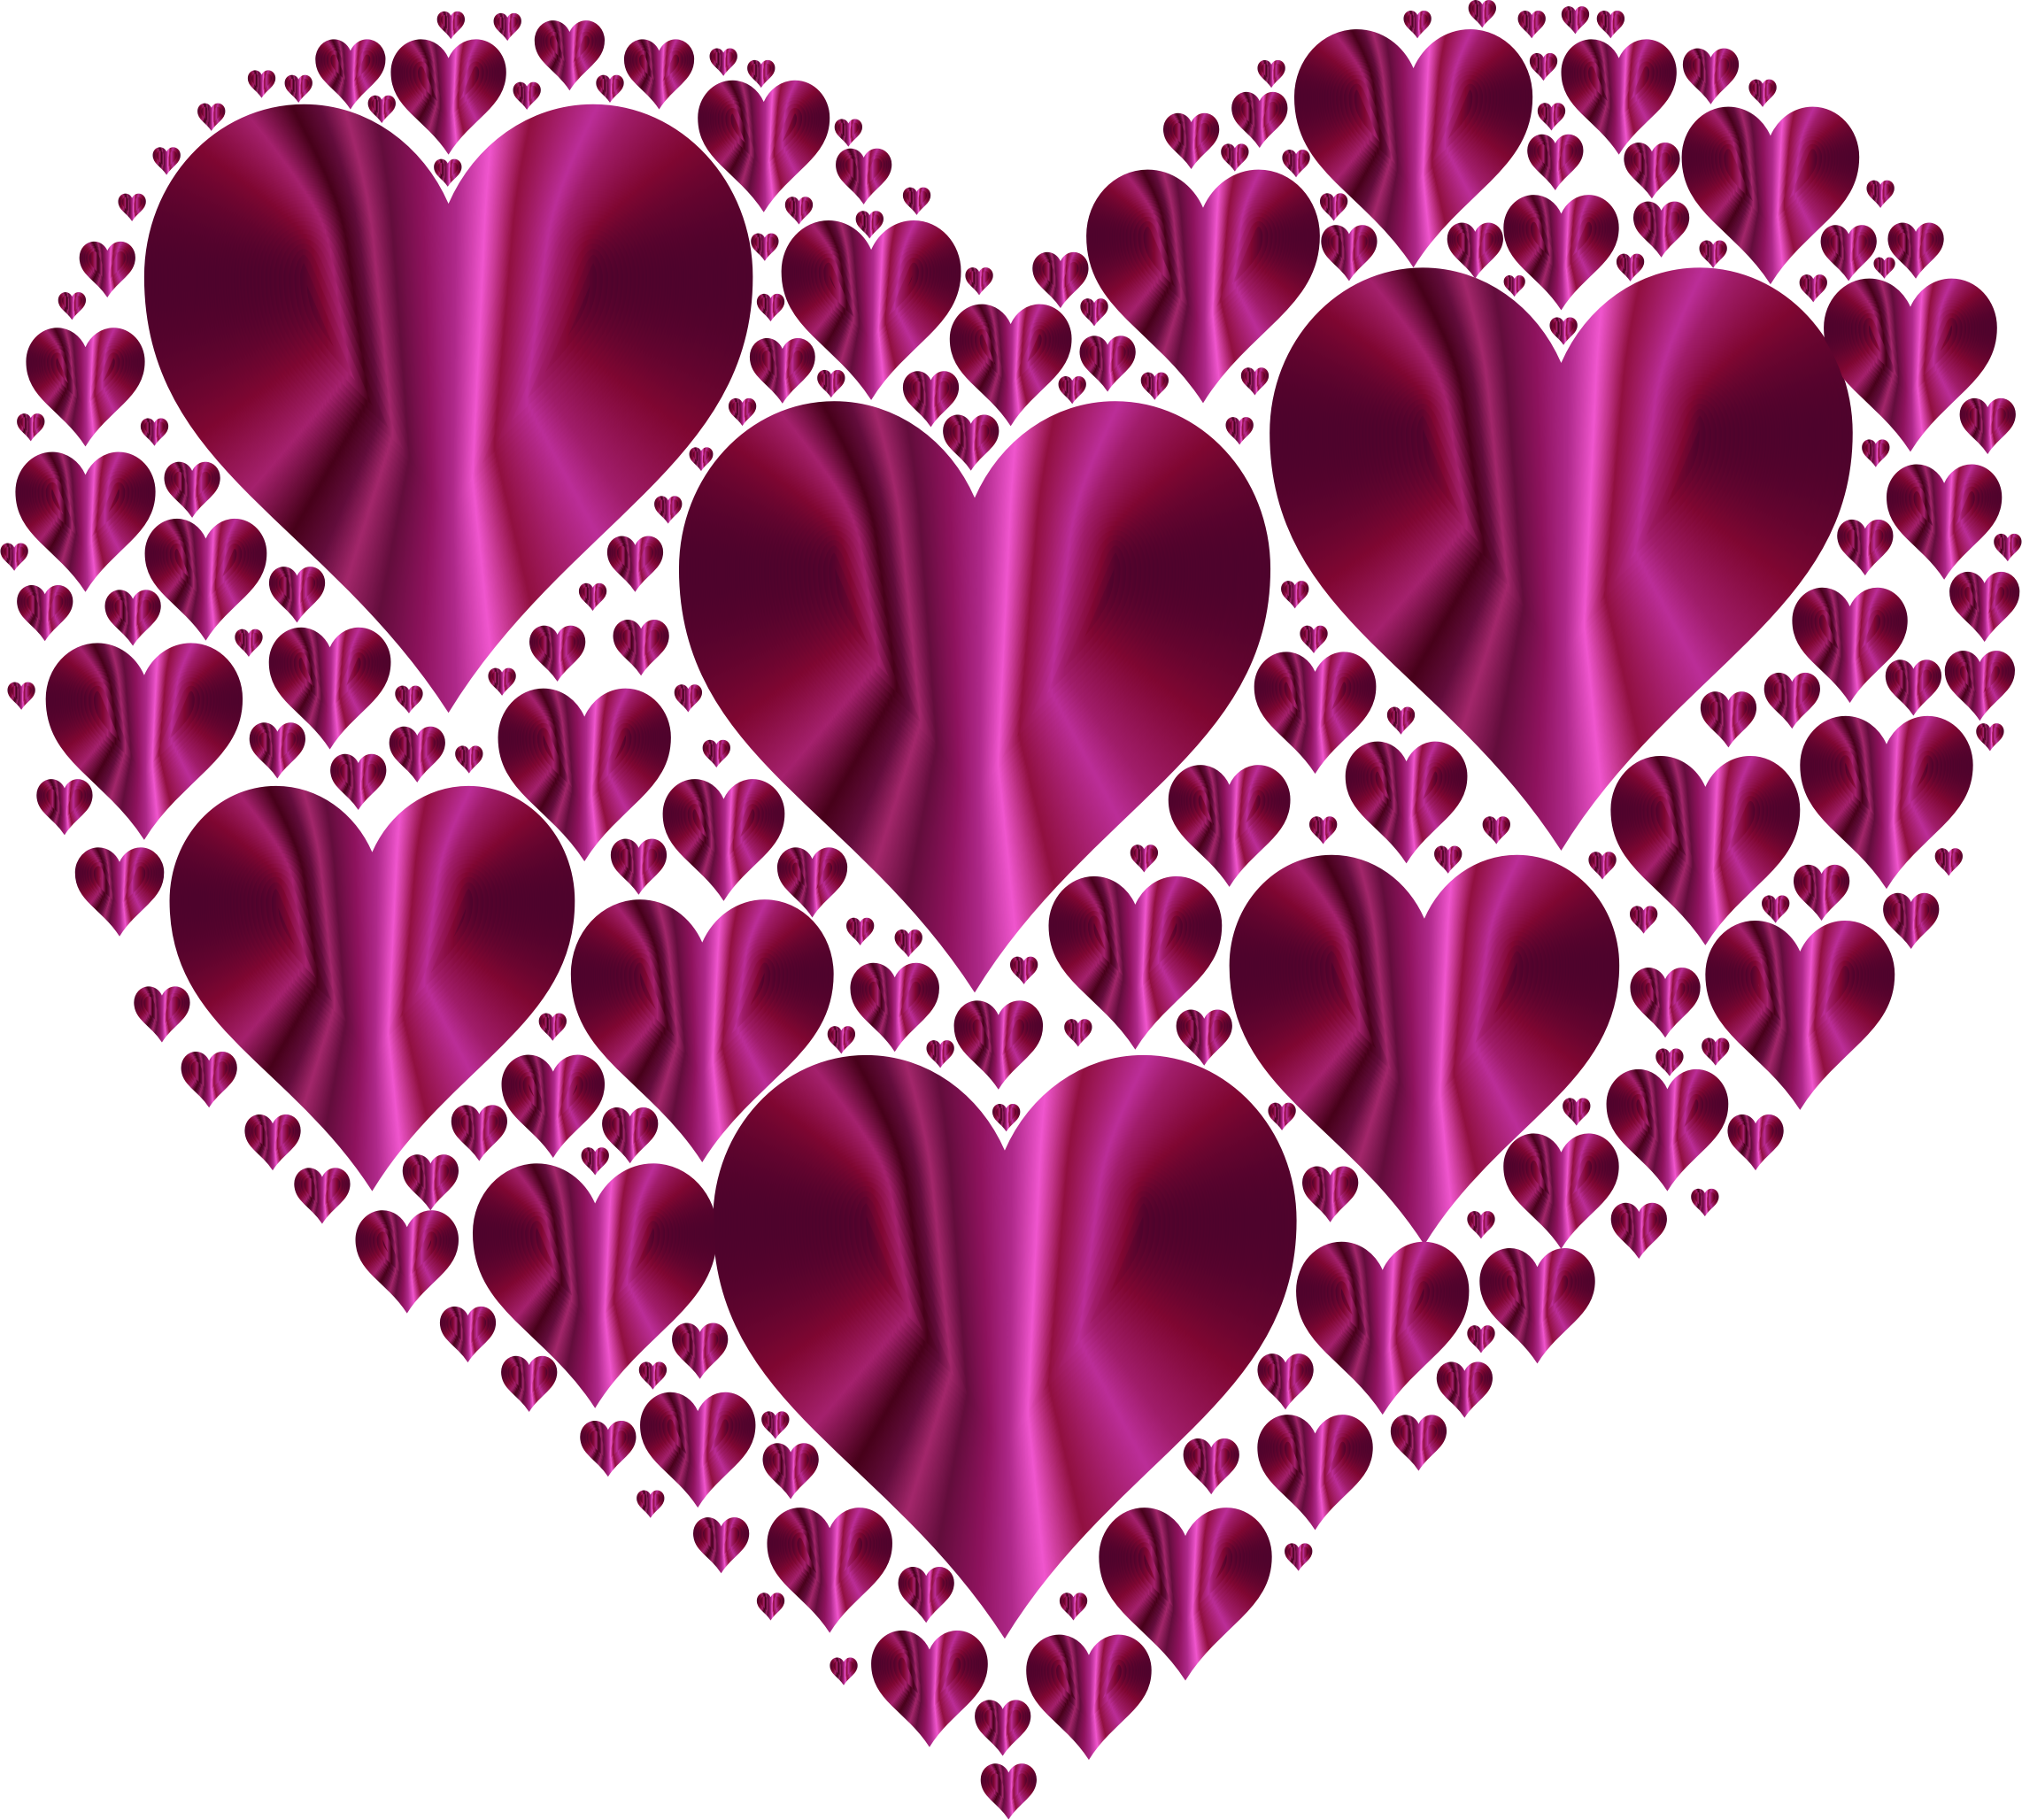 Pink Heart - Moving Animated Heart And Rose (2284x2056)